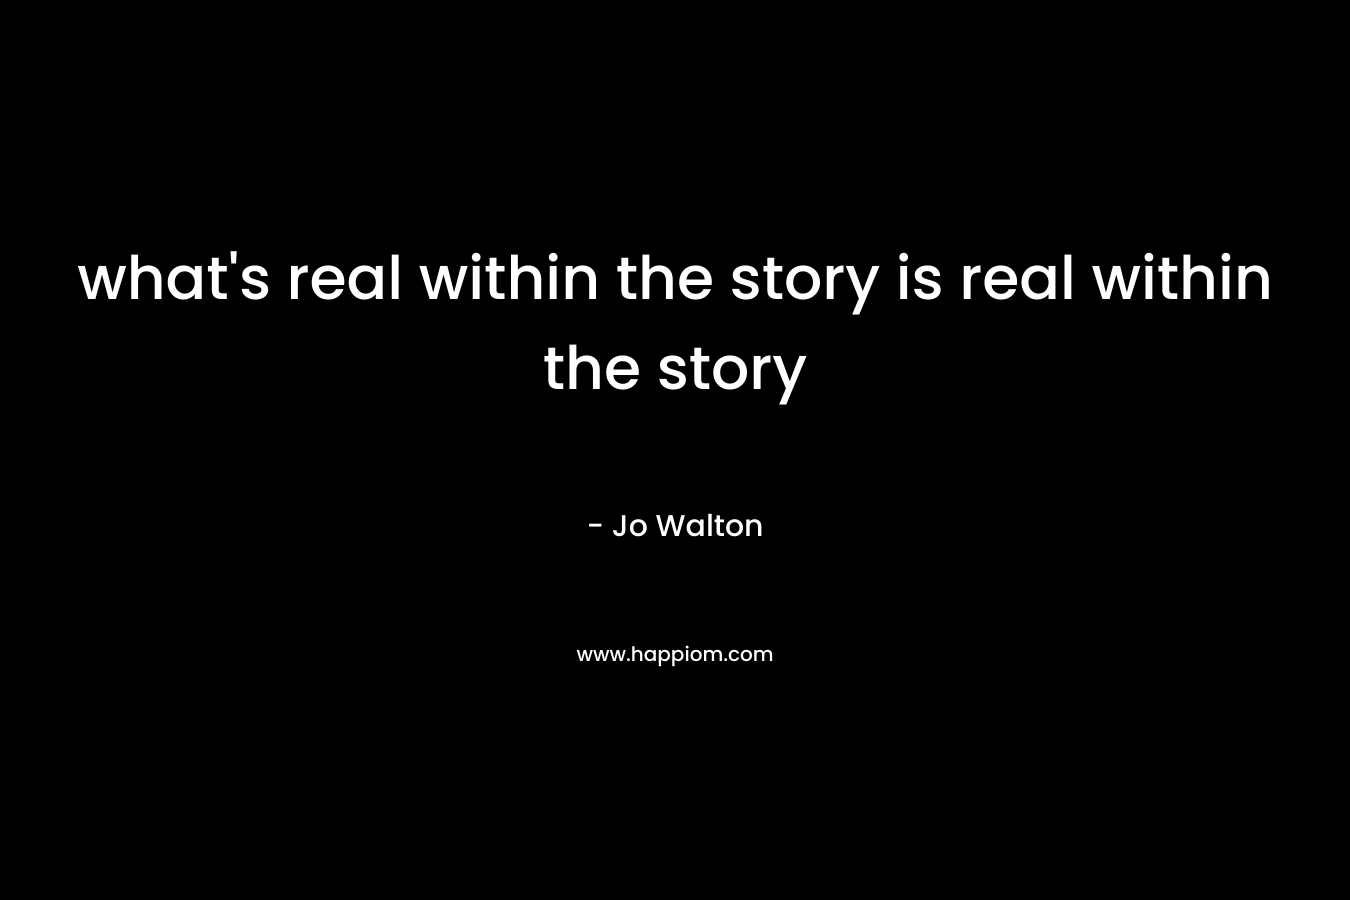 what's real within the story is real within the story